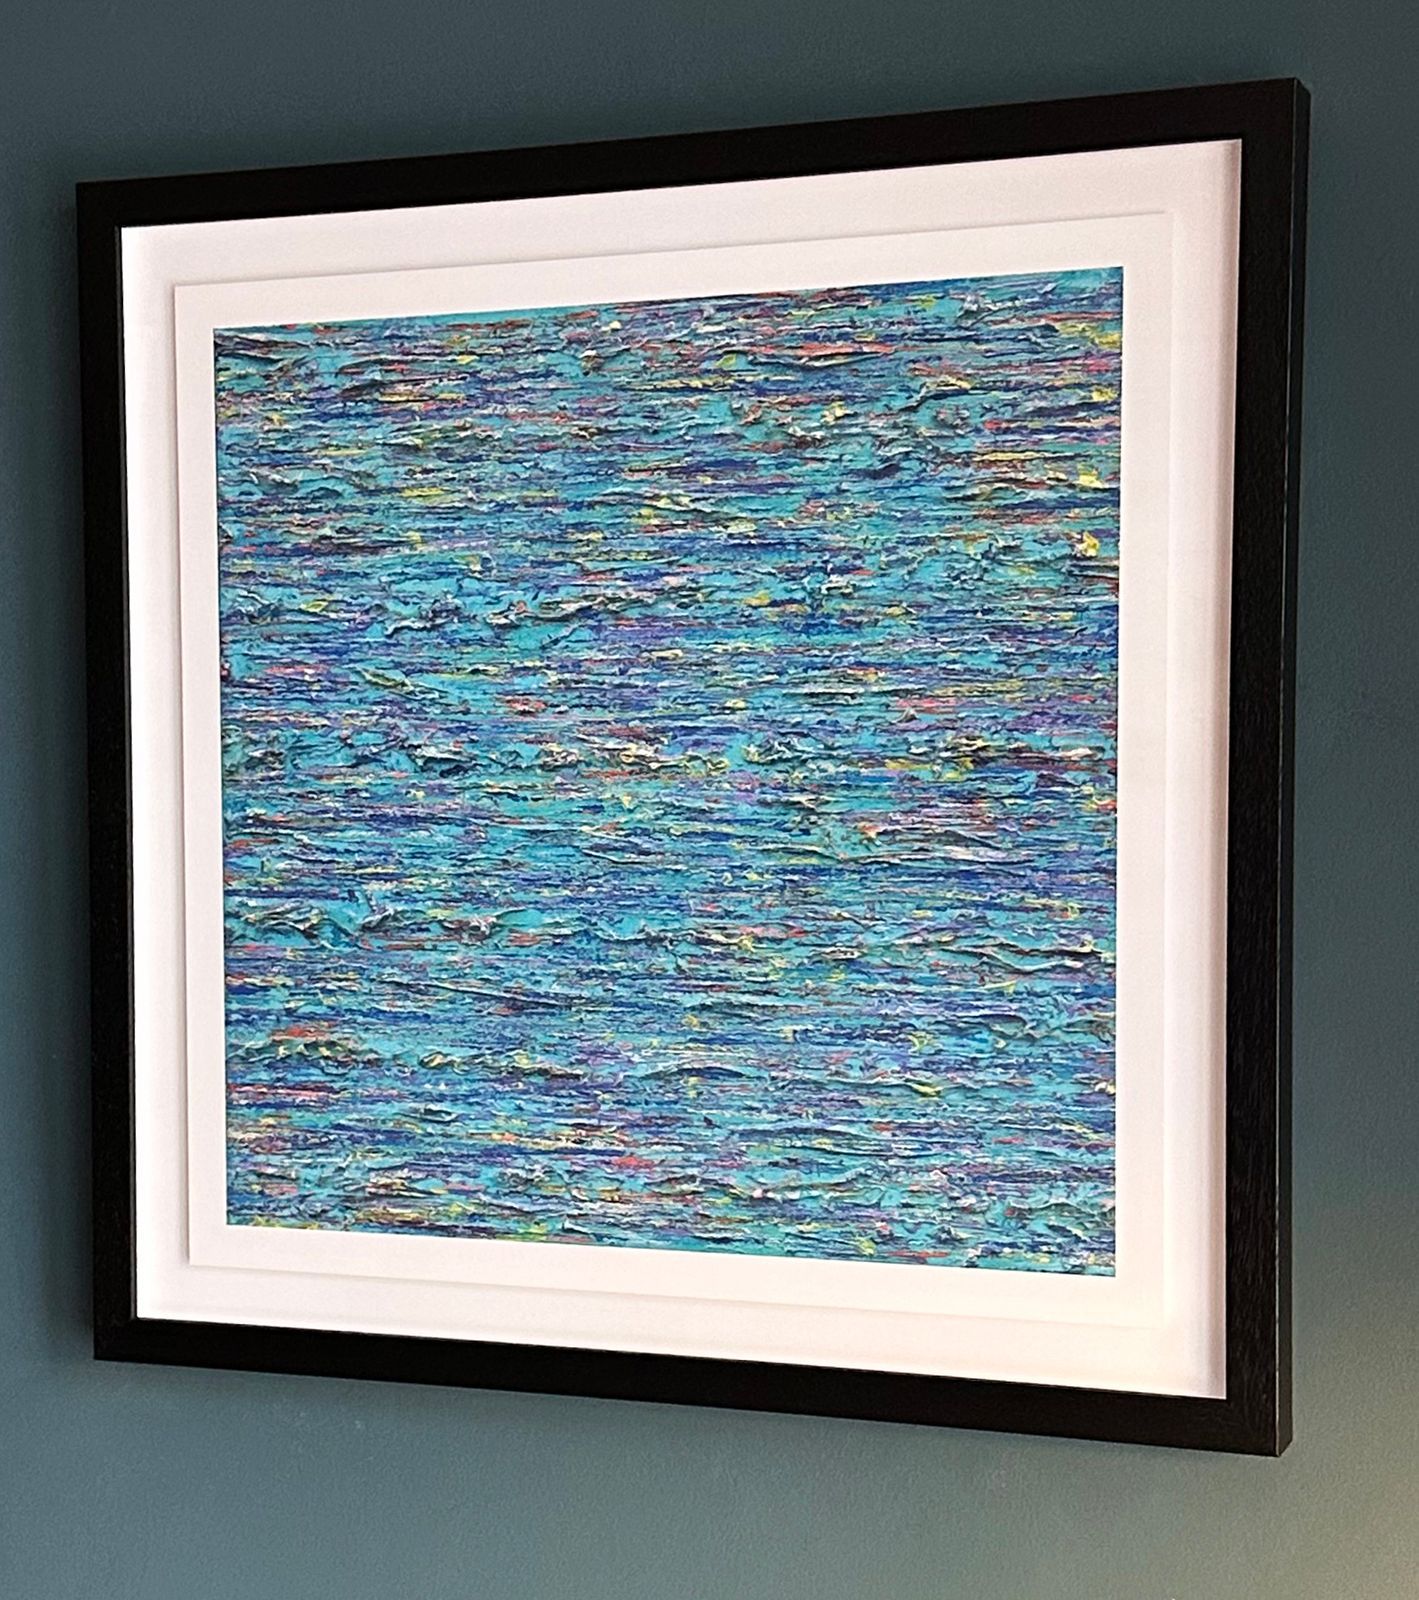 Rich, deep turquoise abstract painting captured as a giclee print shown float mounted in black frame